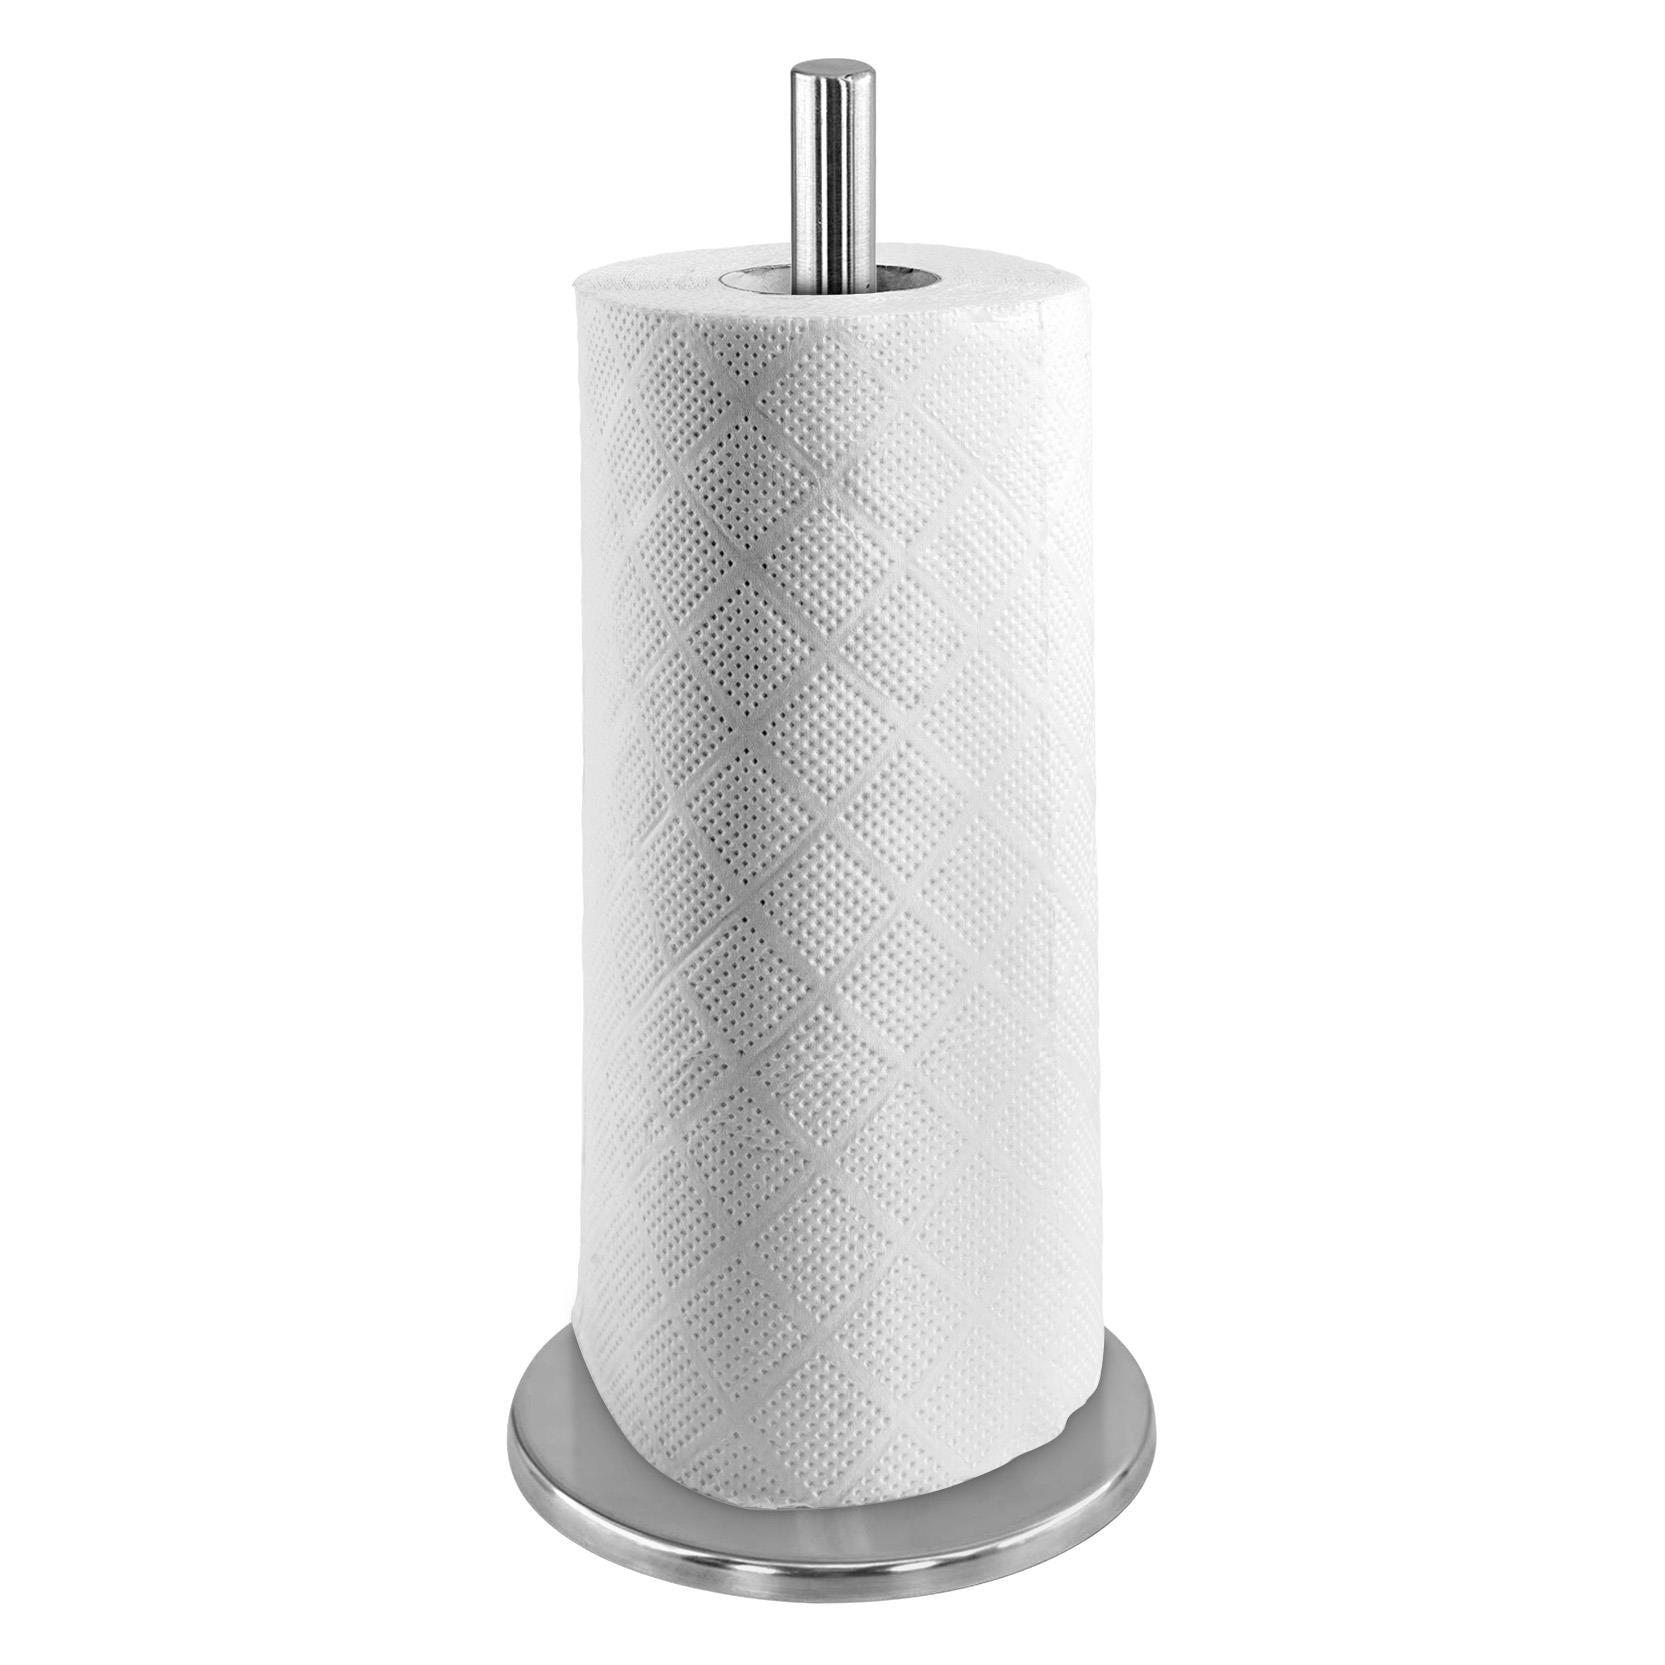 Freestanding Kitchen Roll Holder by Geezy - UKBuyZone